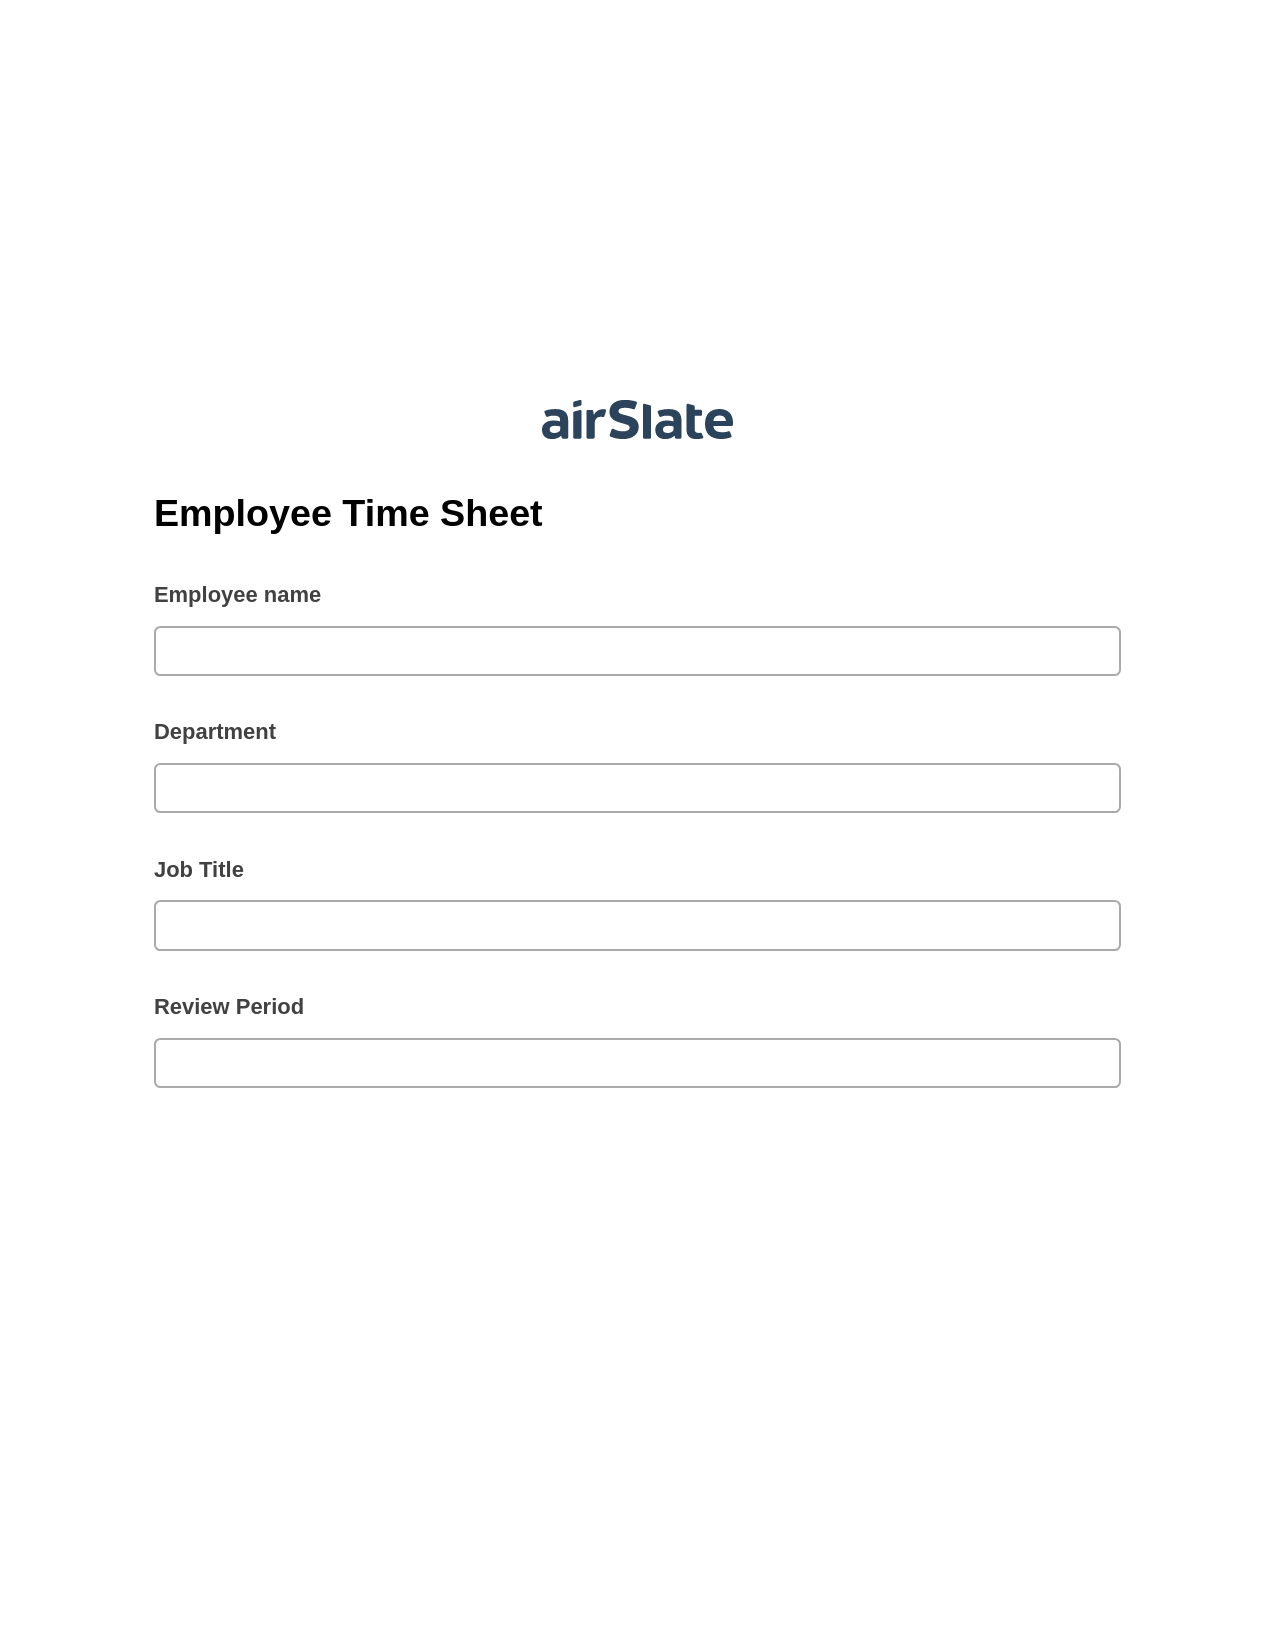 Employee Time Sheet Pre-fill Dropdowns from MySQL Bot, Update Audit Trail Bot, Archive to OneDrive Bot